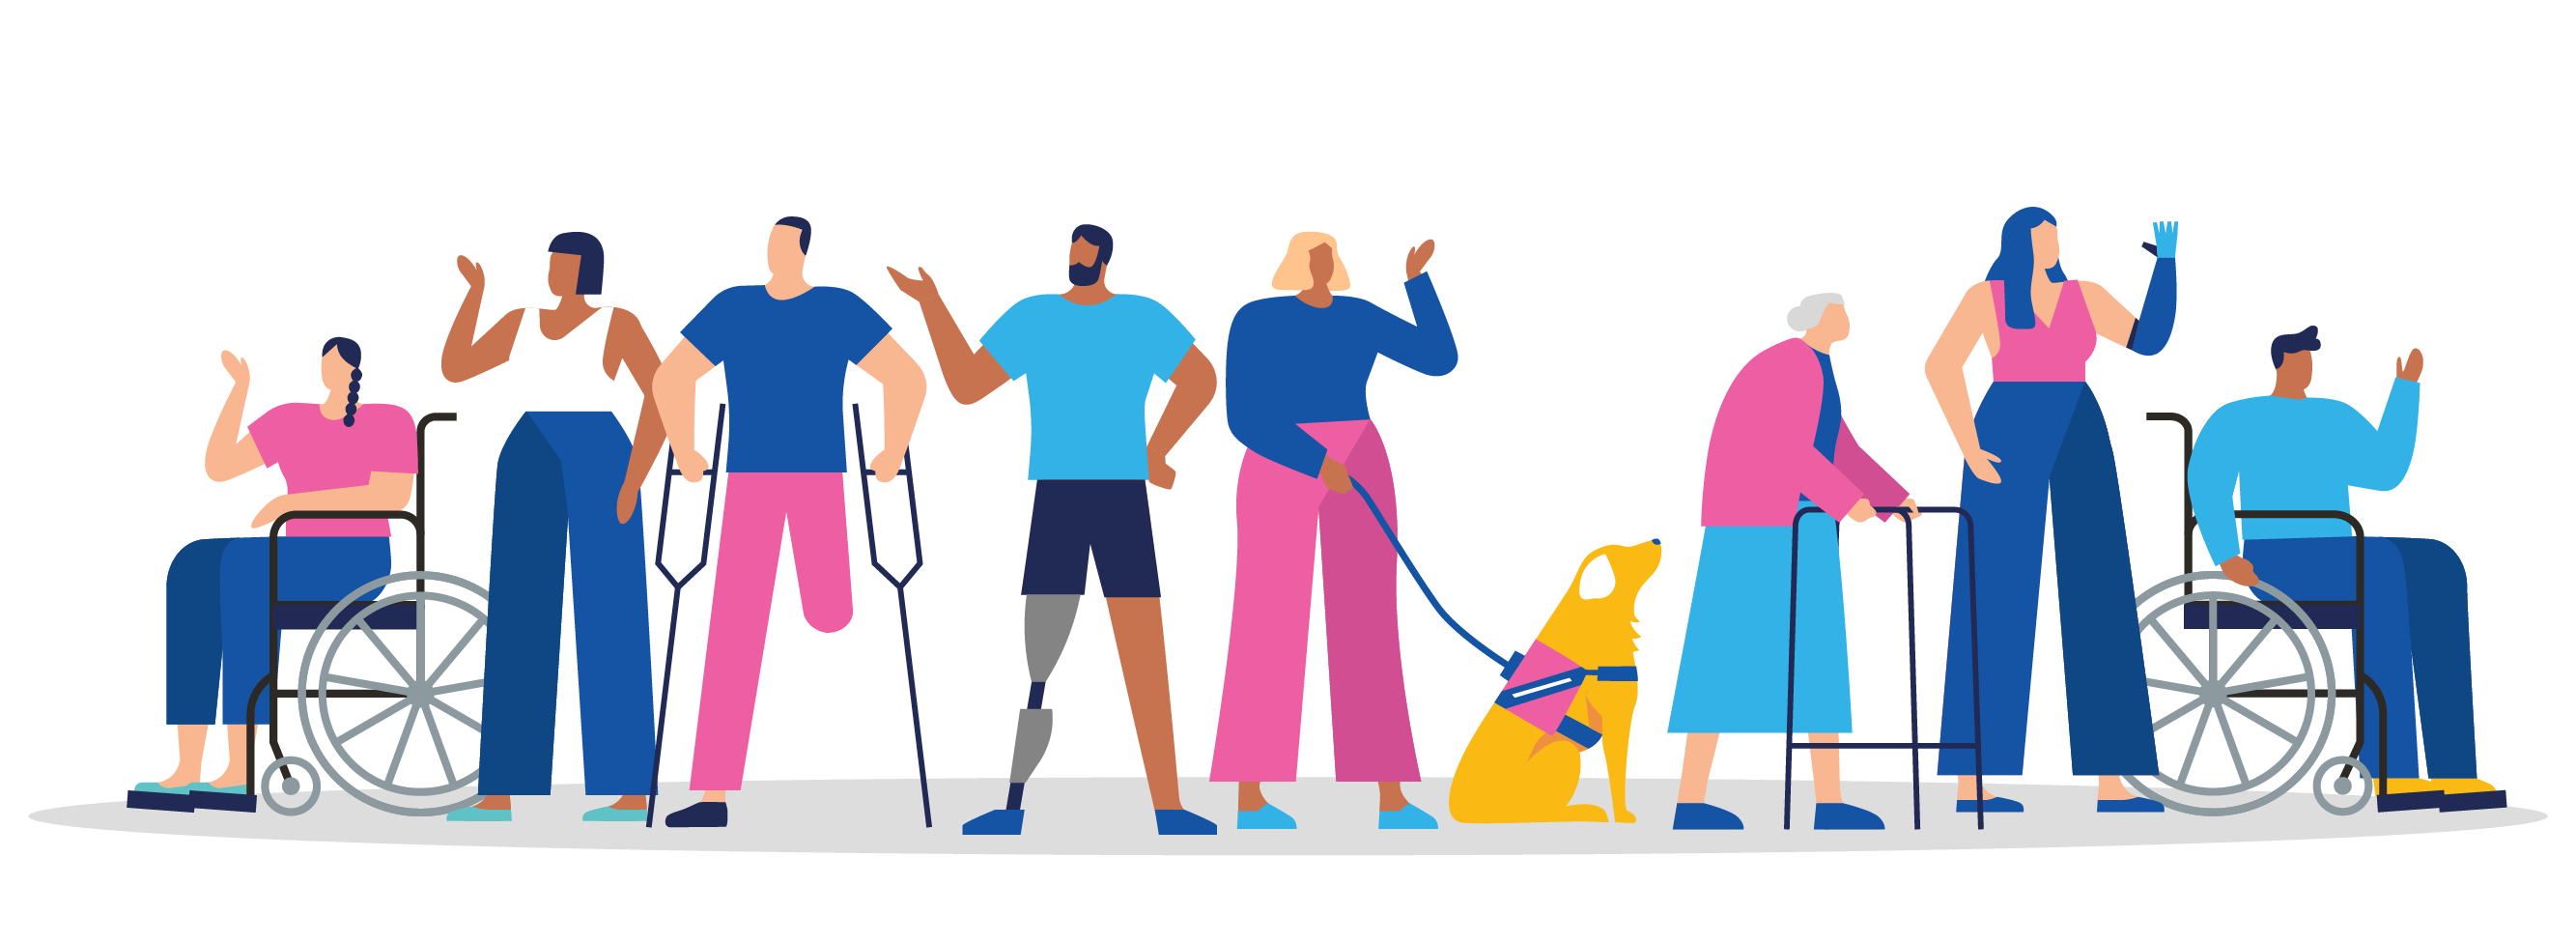 An illustrated group of individuals with different accessibility needs